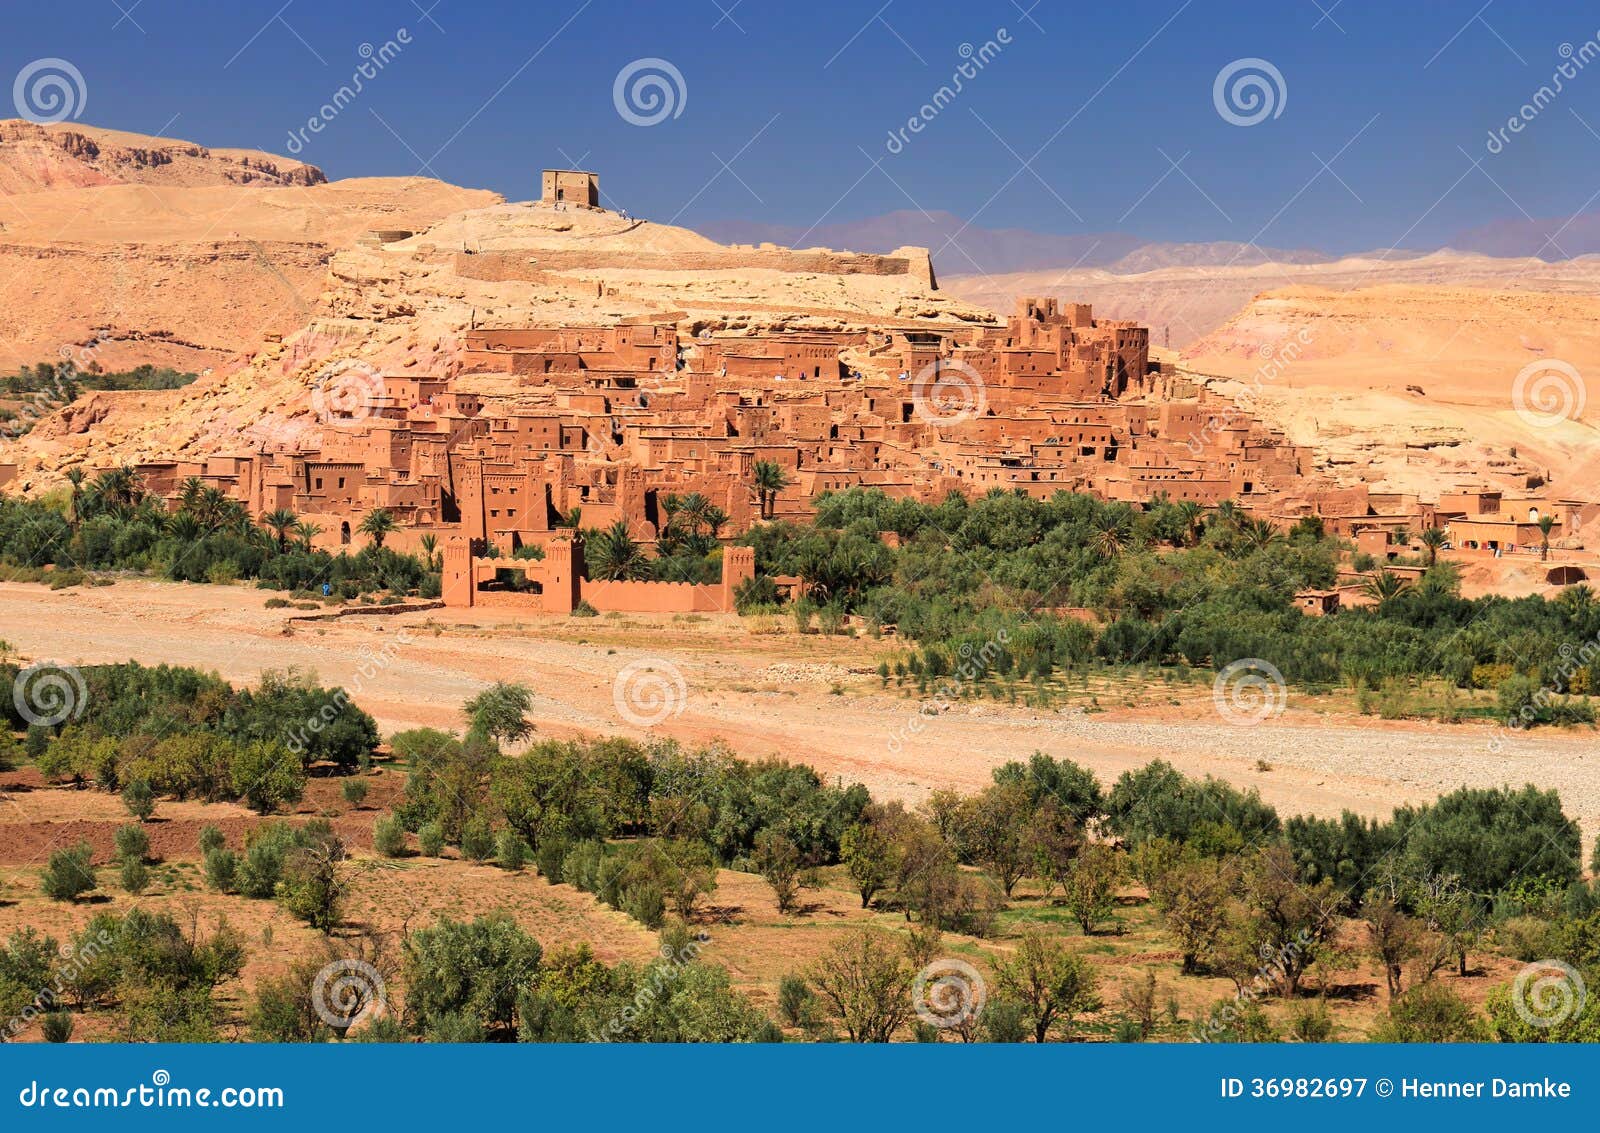 old ksar of ait-ben-haddou in morocco